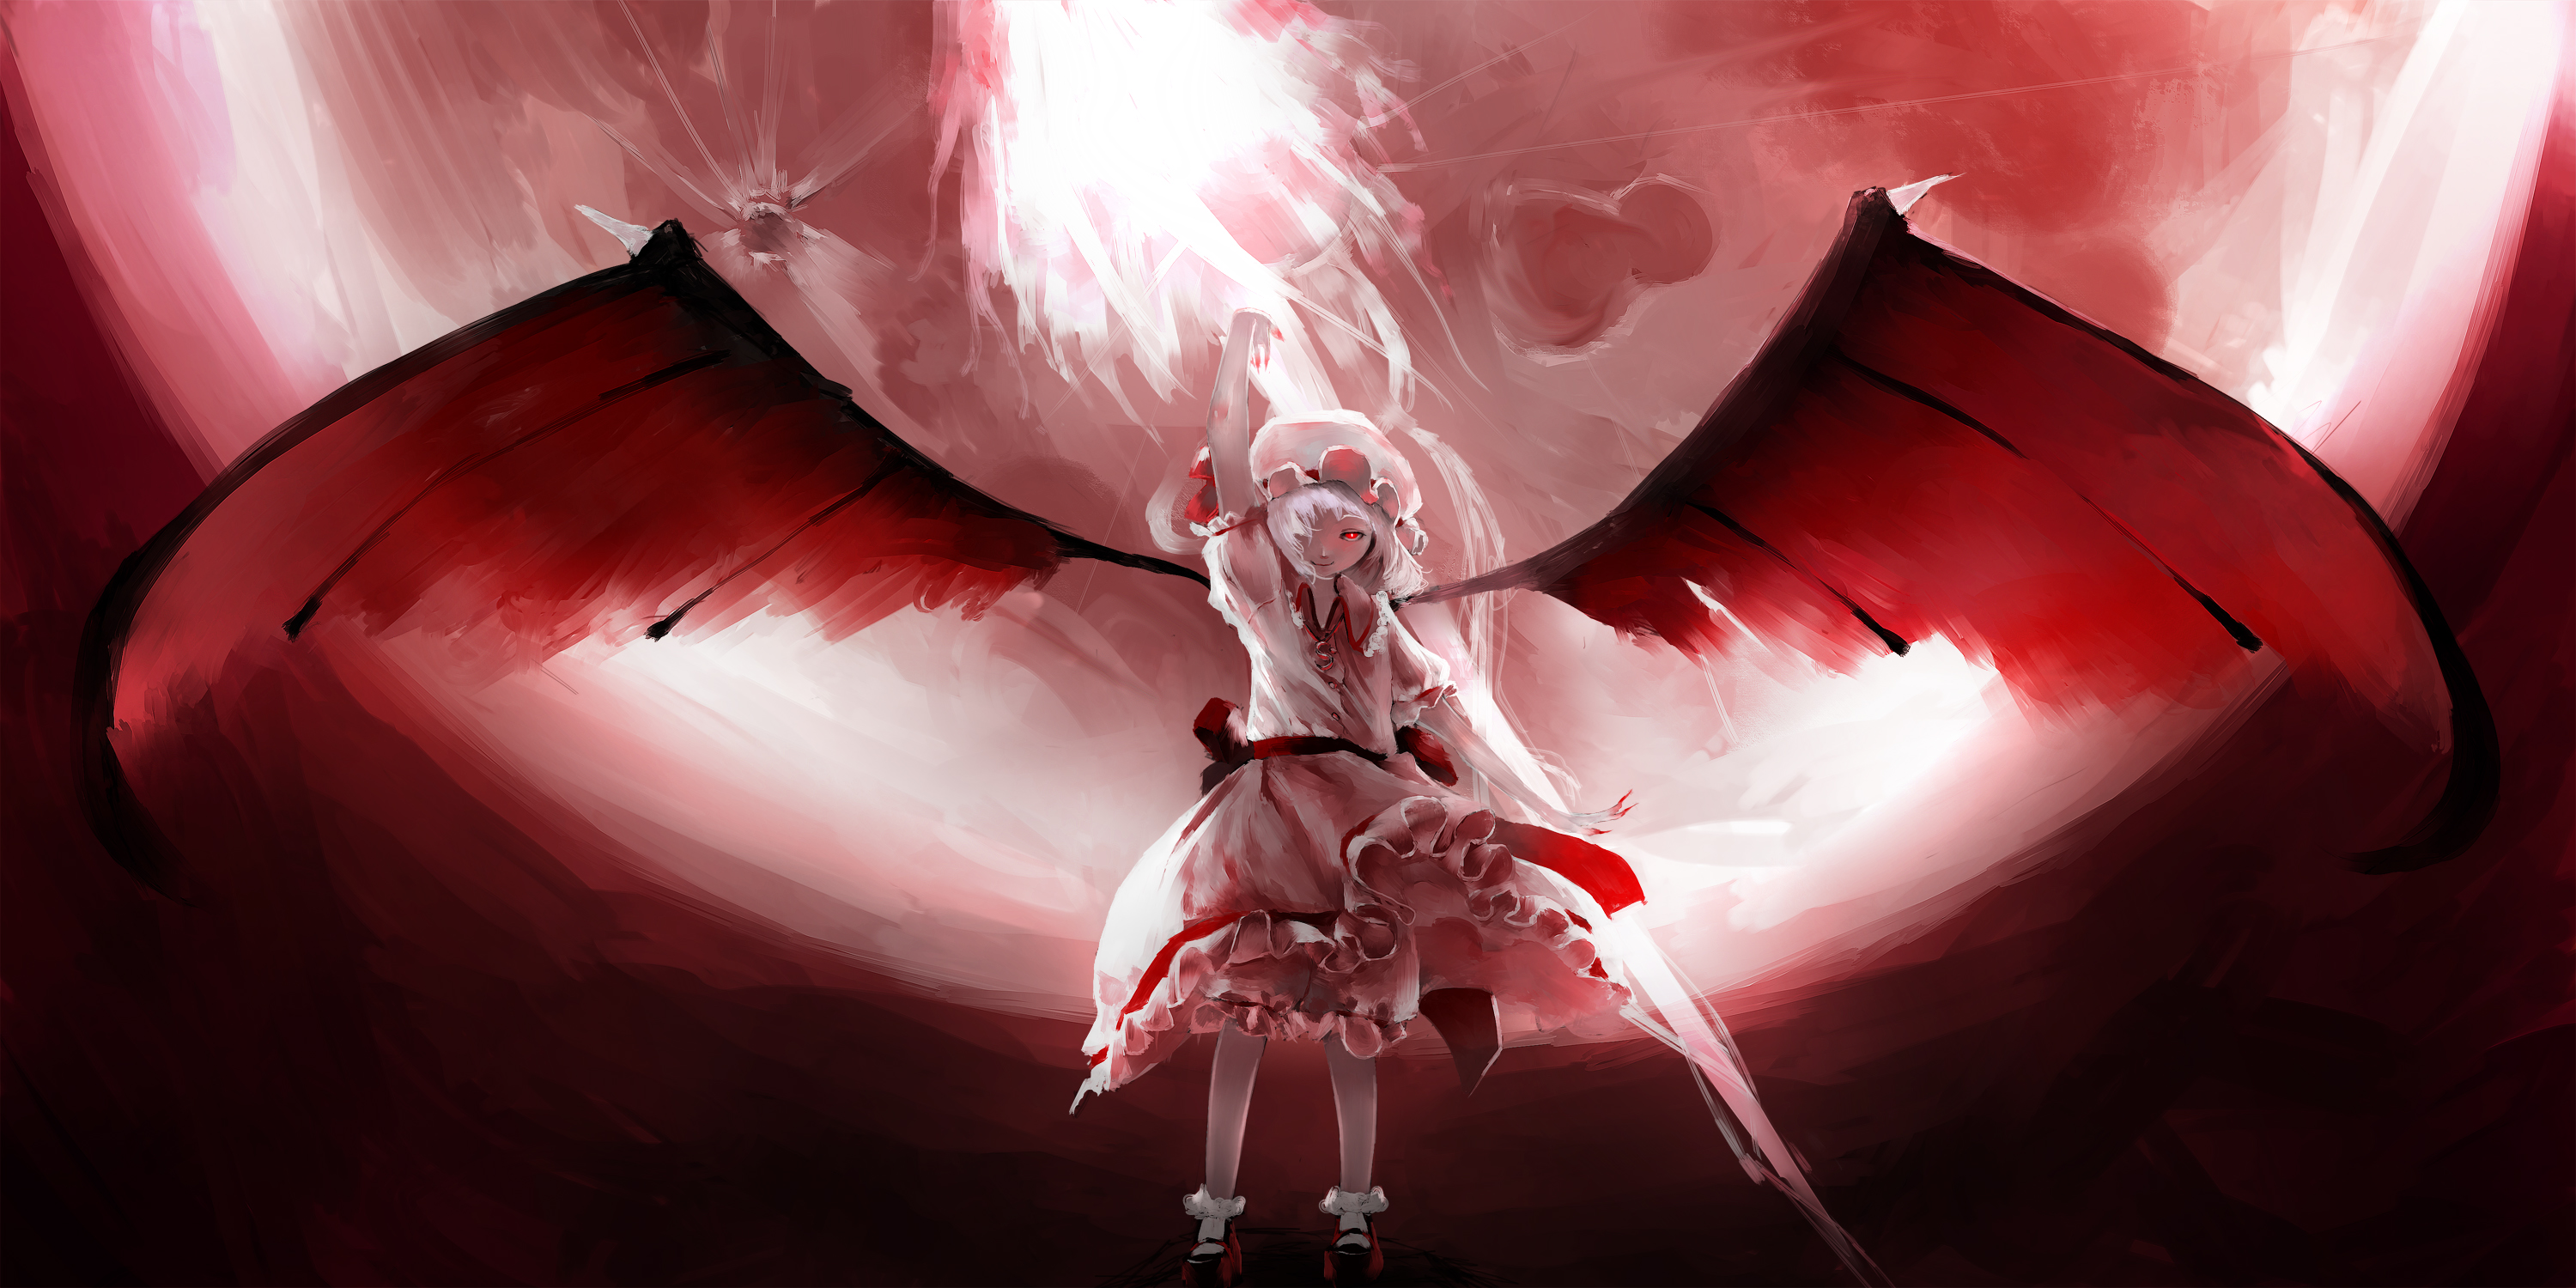 Remilia Scarlet from the anime Touhou: captivating character with a bewitching presence.